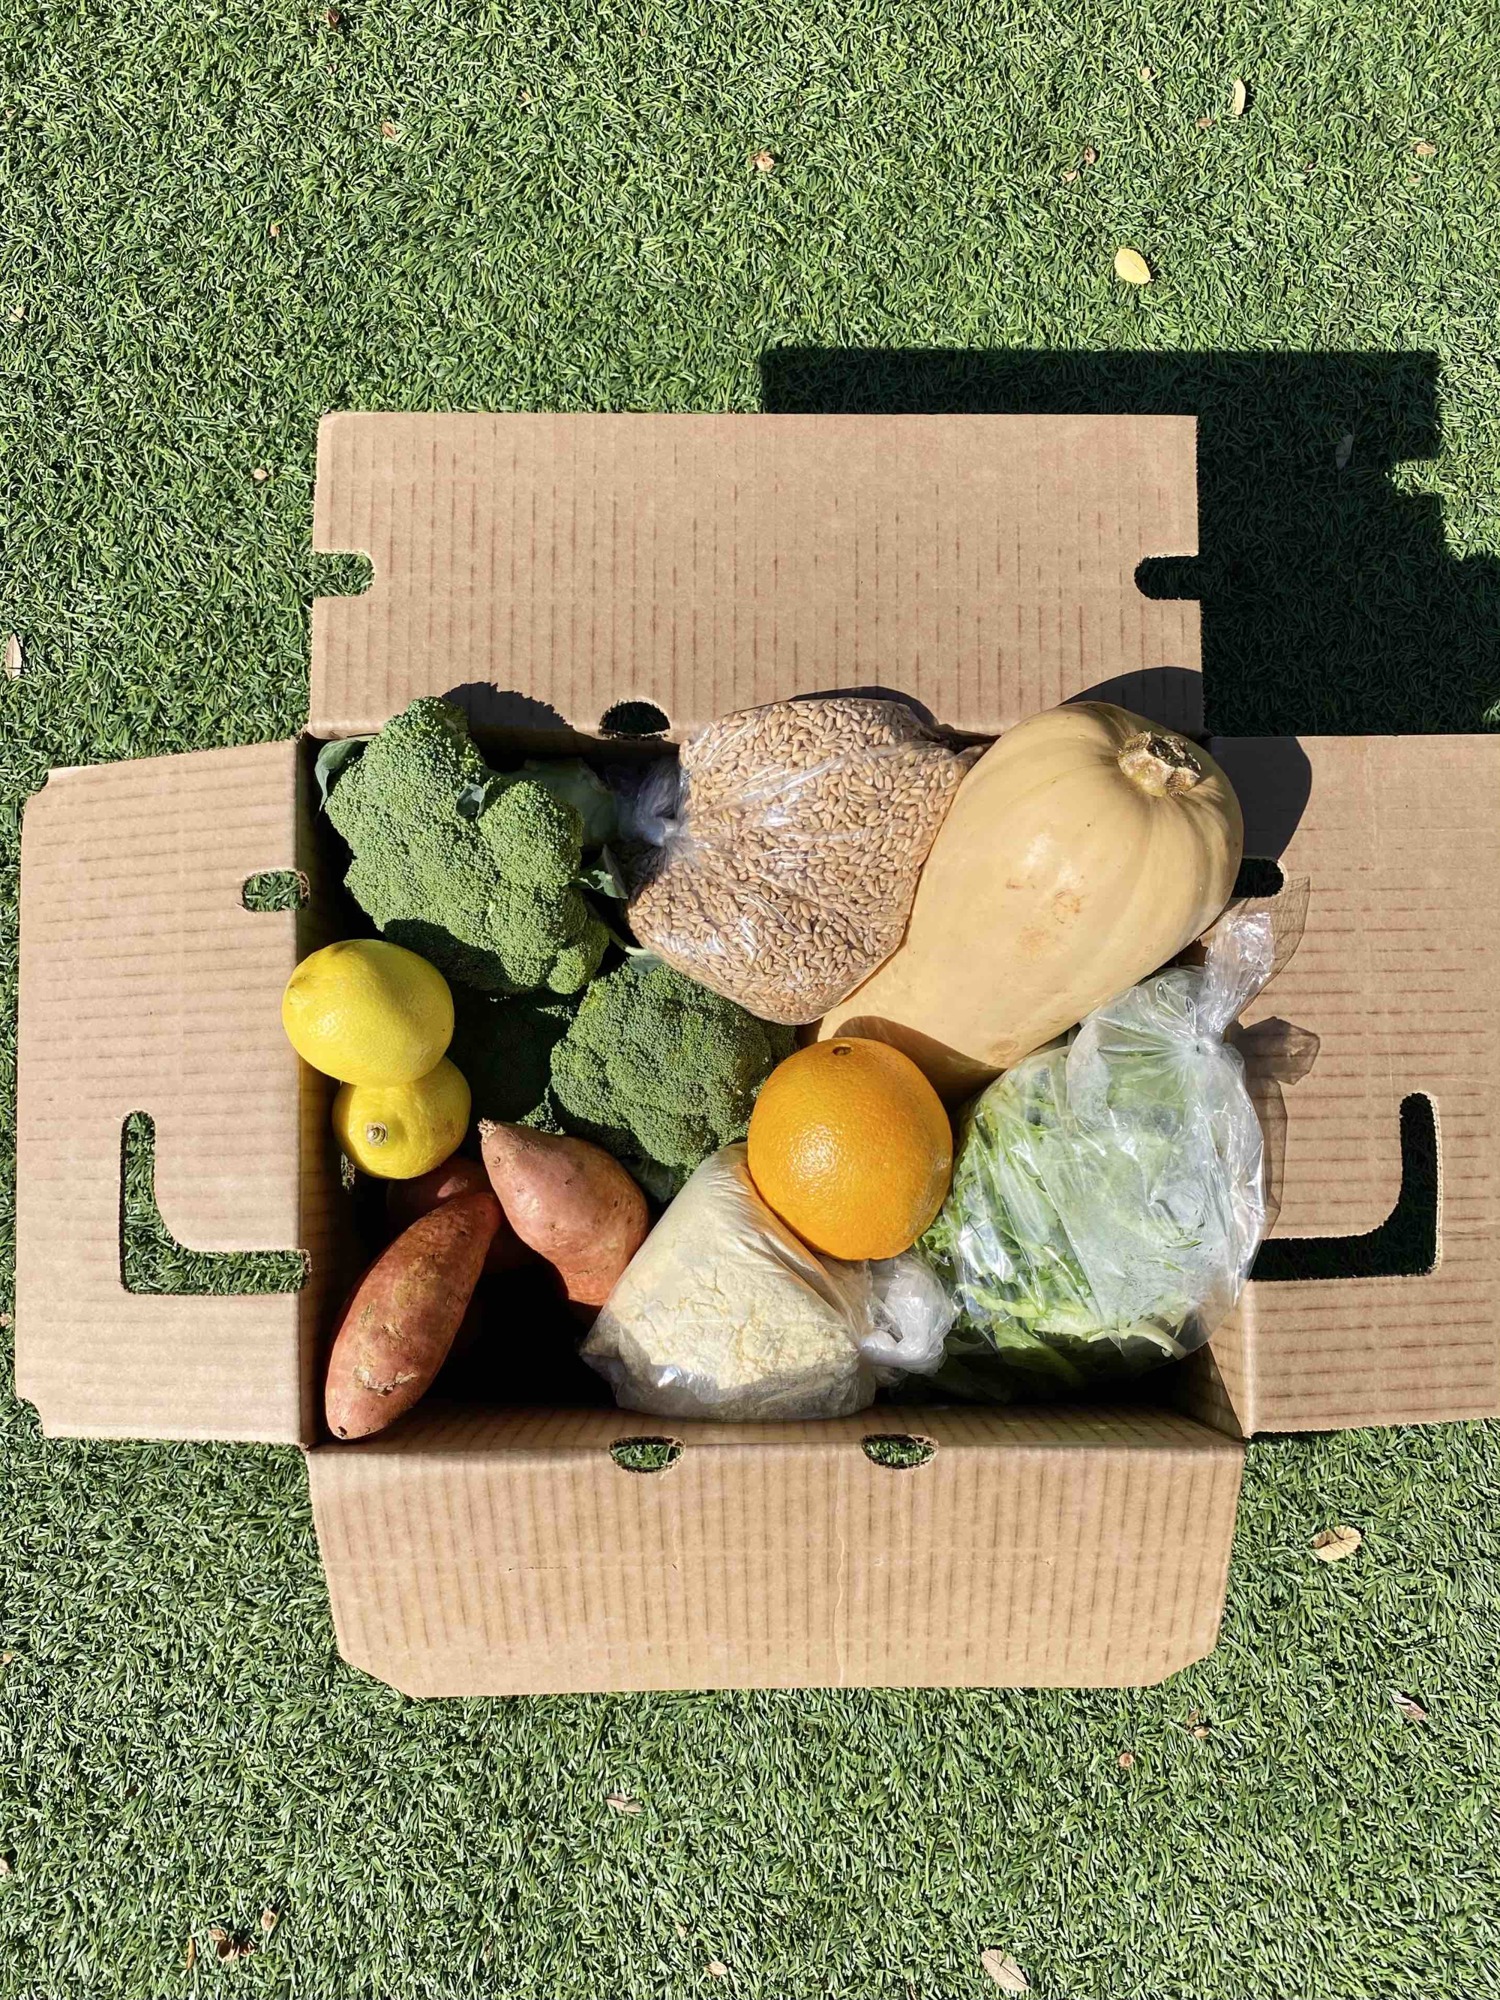 Courtesy. In November, Johnson brought the farm boxes back after a summer break when it was too hot for farmers to grow produce for the box.